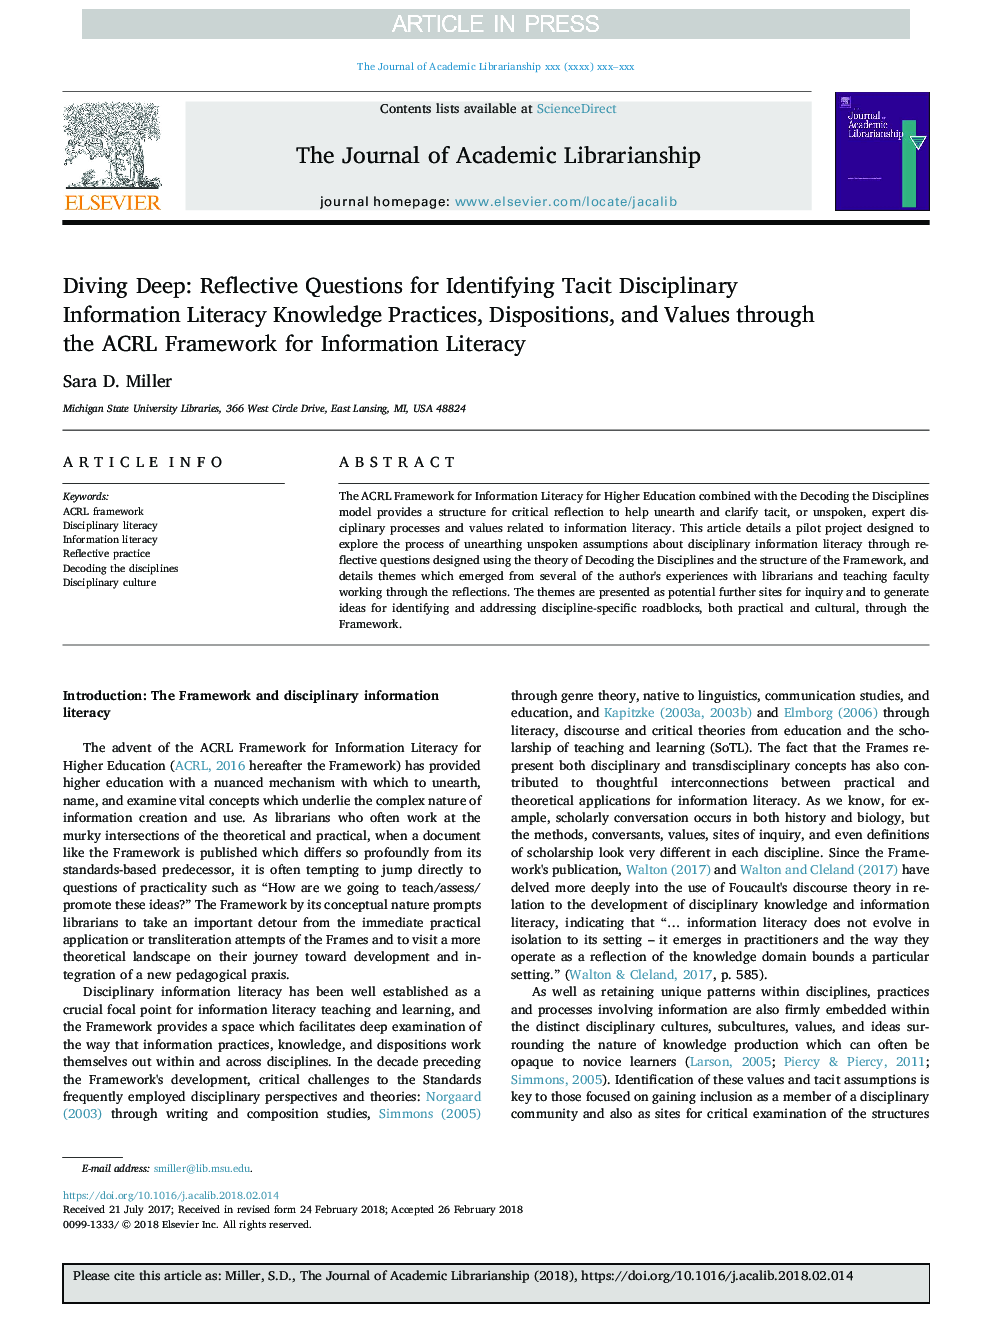 Diving Deep: Reflective Questions for Identifying Tacit Disciplinary Information Literacy Knowledge Practices, Dispositions, and Values through the ACRL Framework for Information Literacy